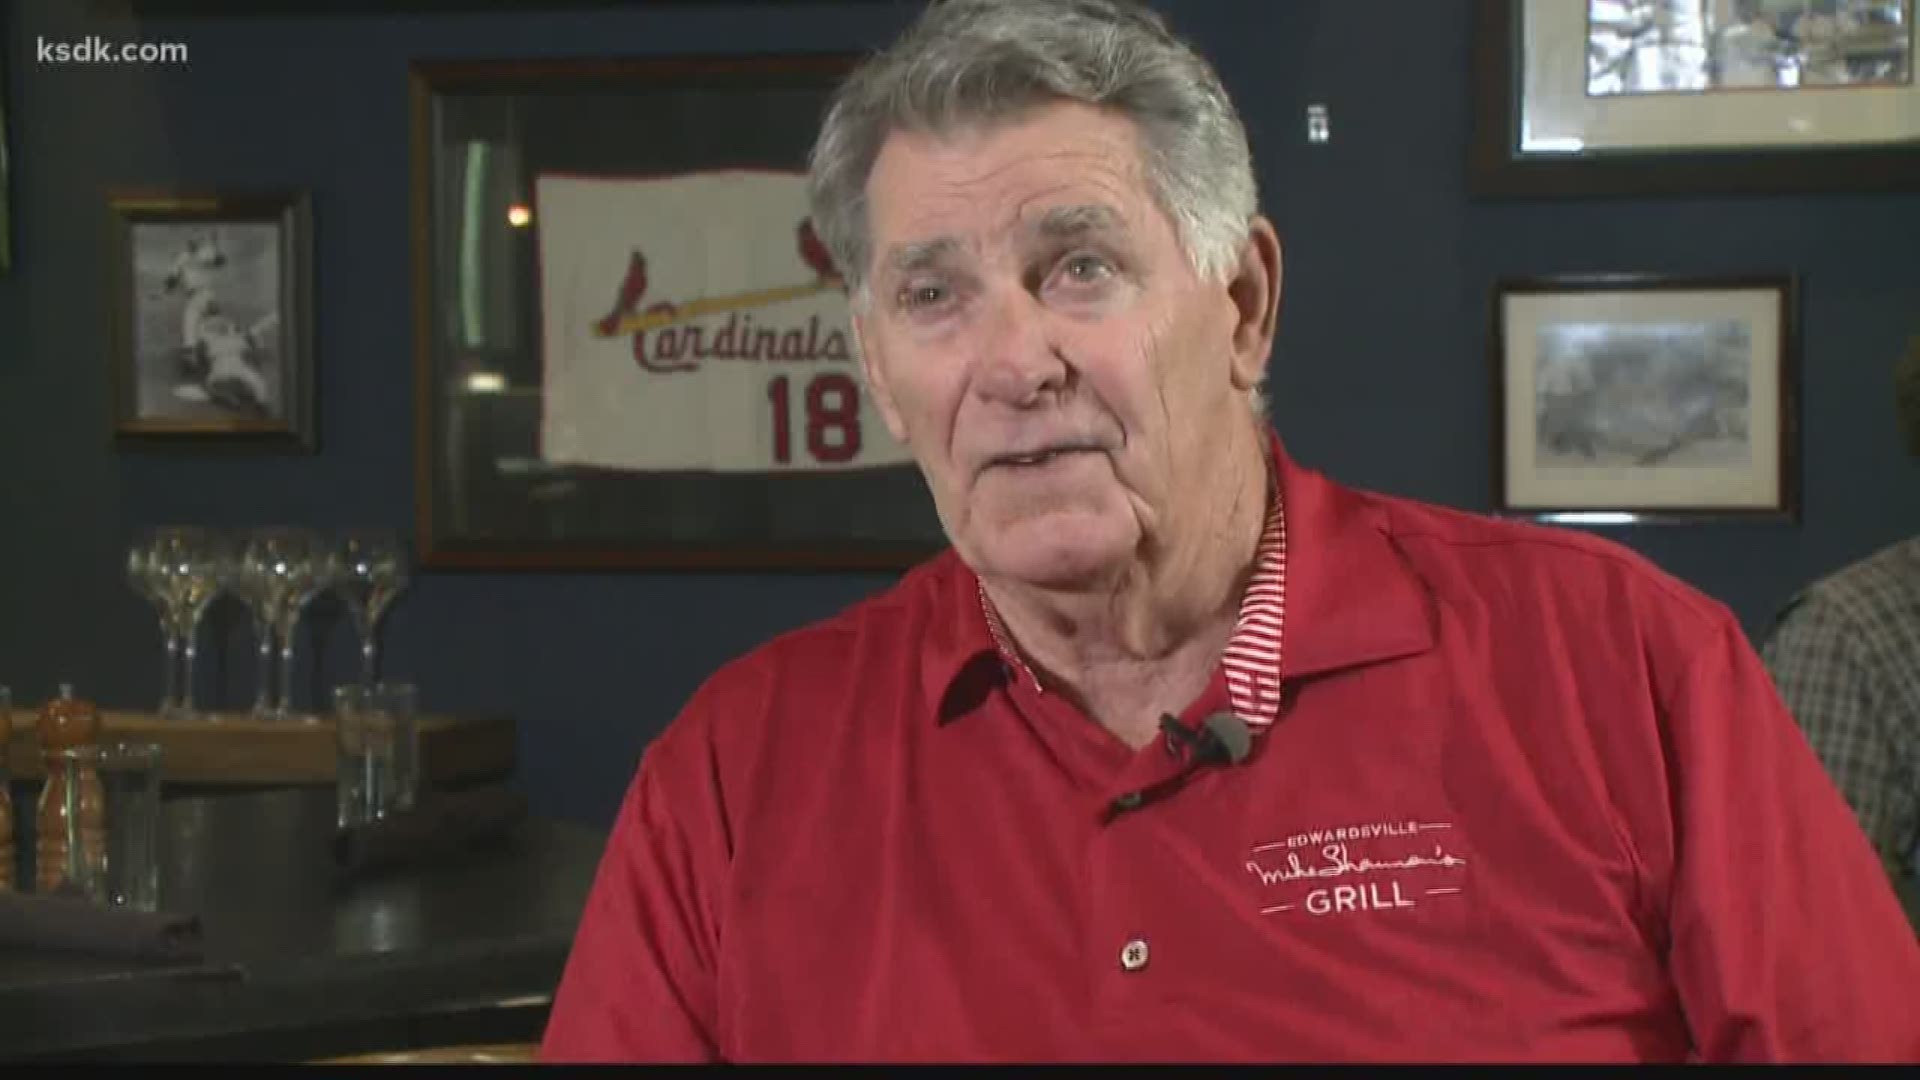 Did you know Mike Shannon was one of this area’s greatest multi-sport stars ever?